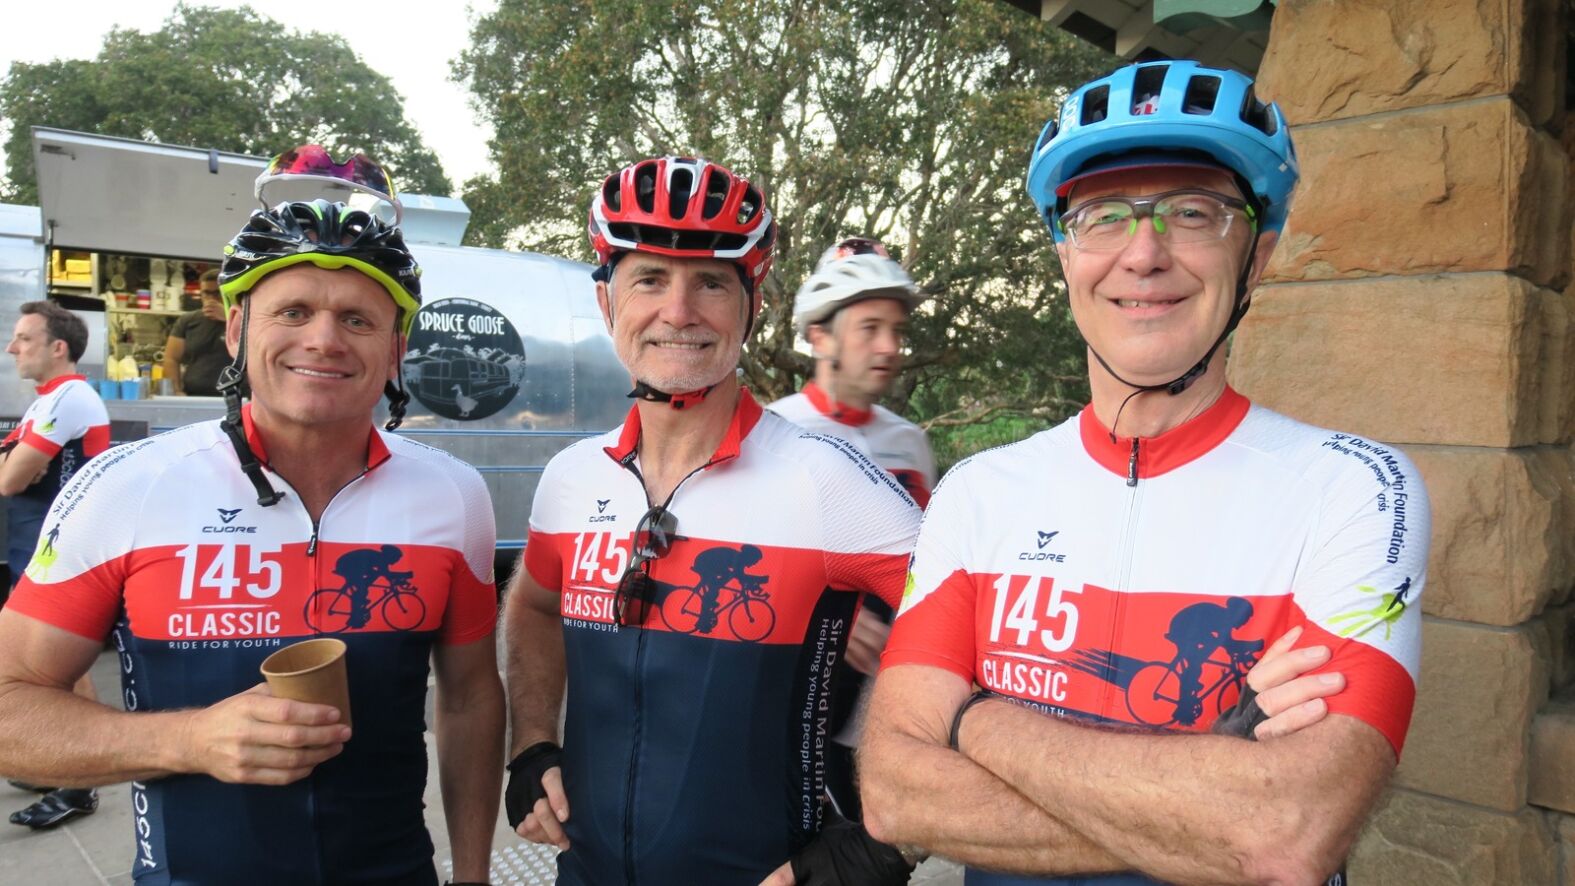 Three men in cycling uniforms and helmets smiling